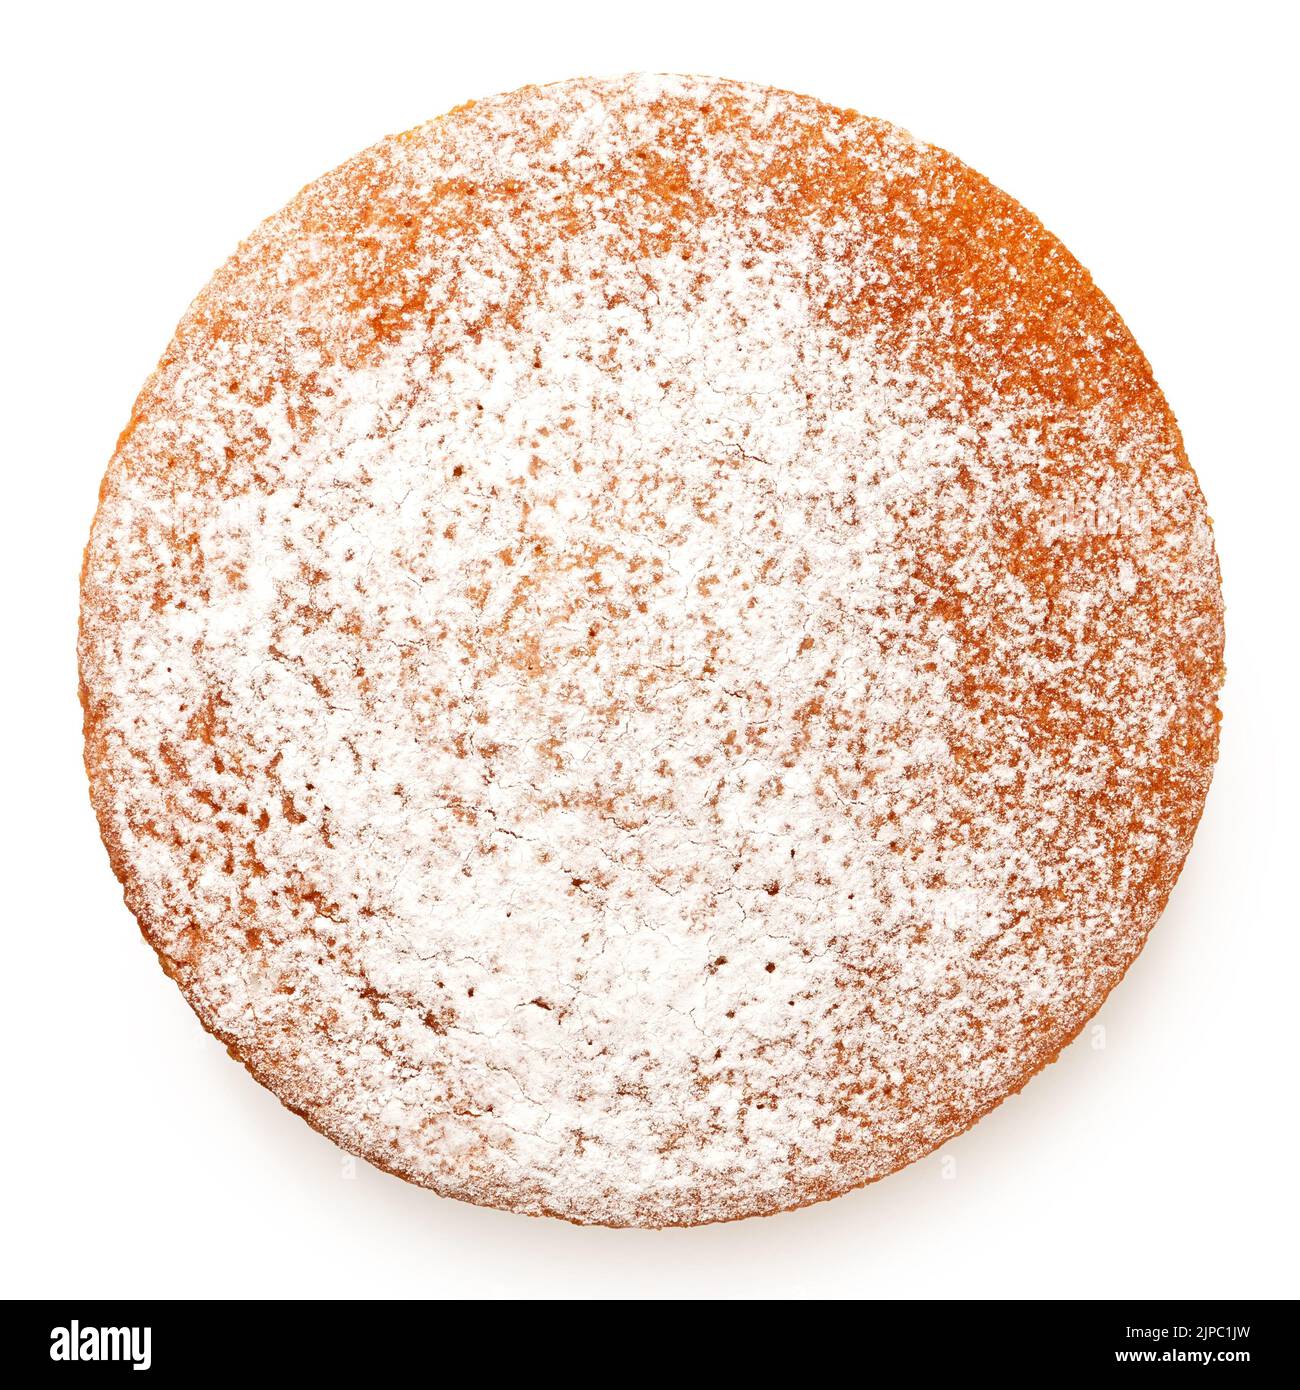 Whole lemon sponge cake with icing sugar topping isolated on white. Top view. Stock Photo